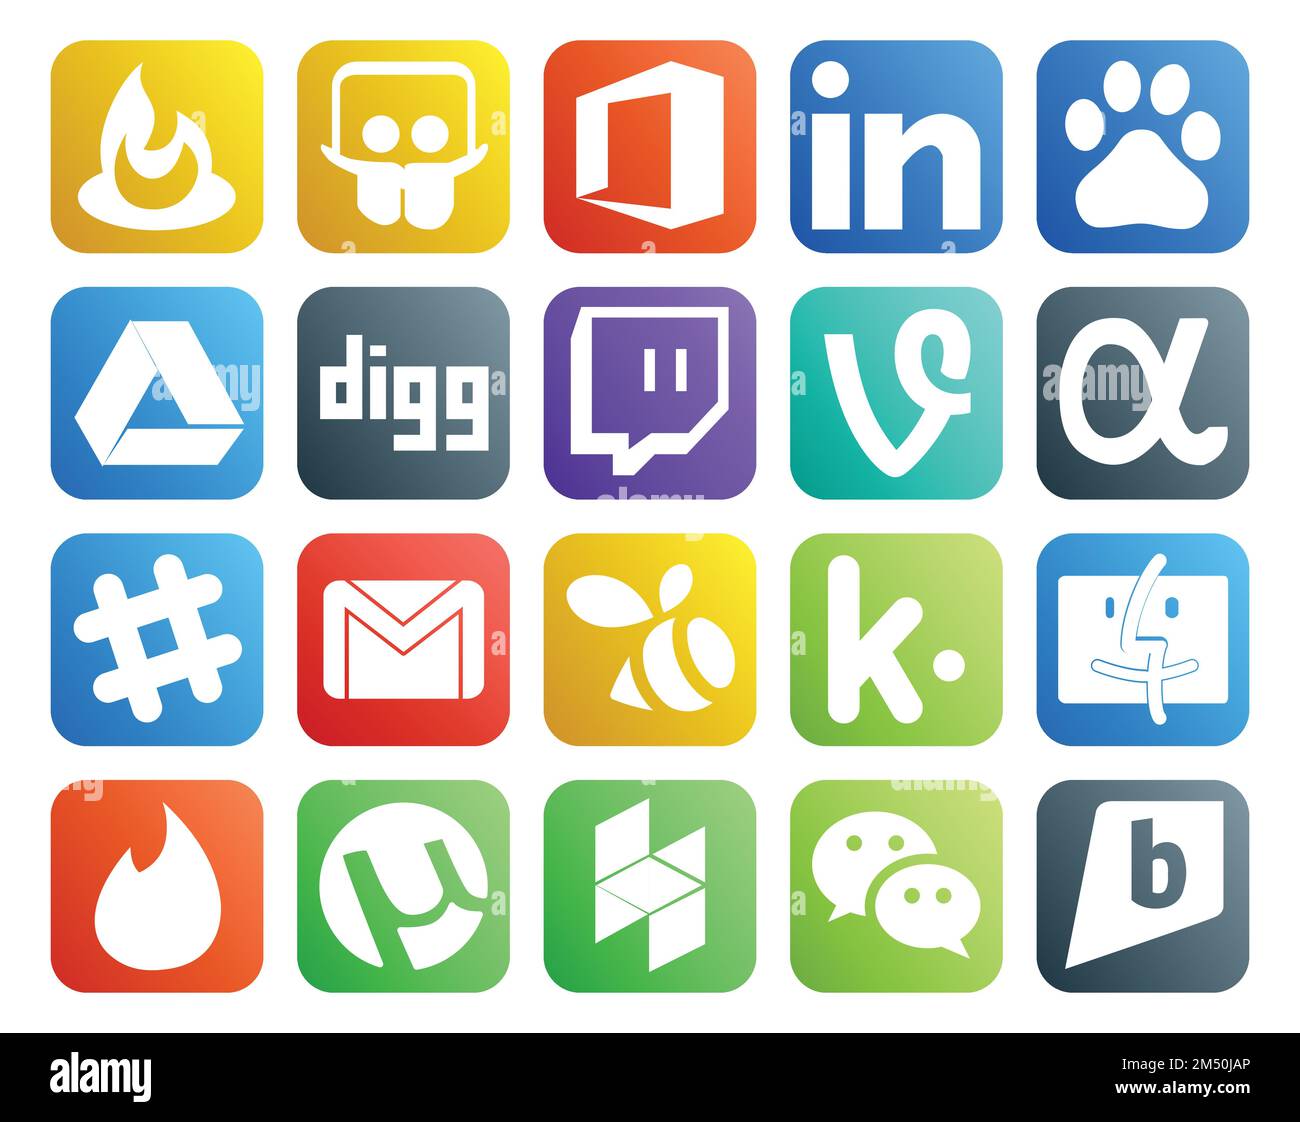 20 Social Media Icon Pack Including finder. swarm. vine. mail. gmail Stock Vector